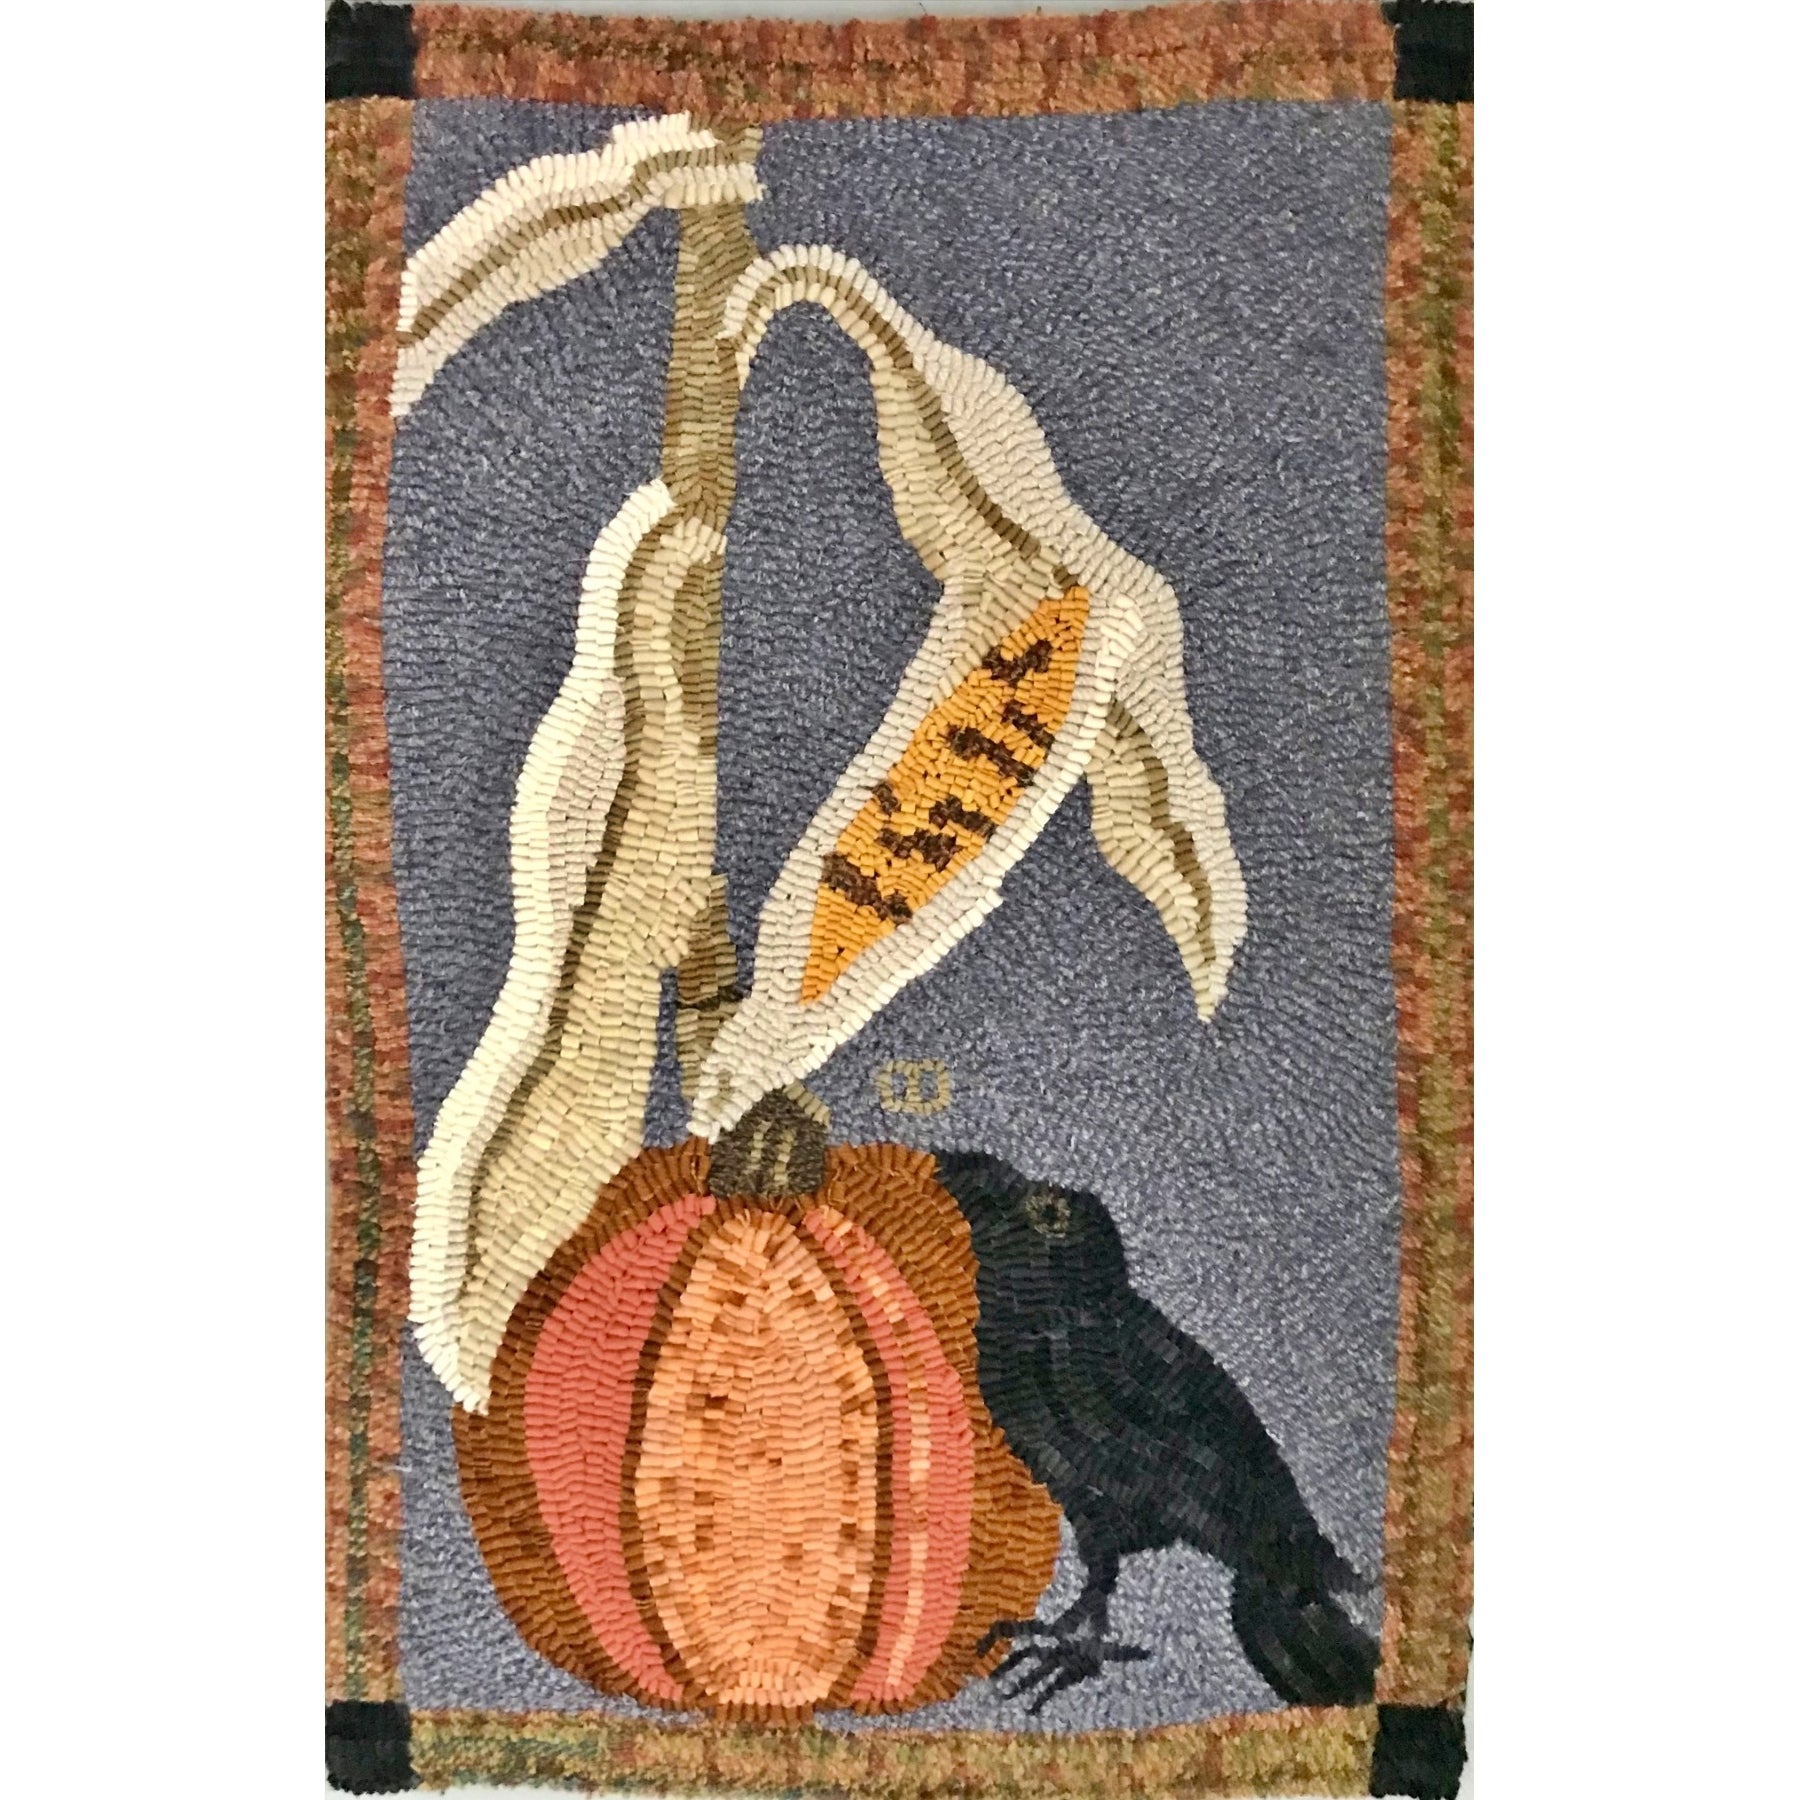 Fall Trio, rug hooked by Cay Dykes